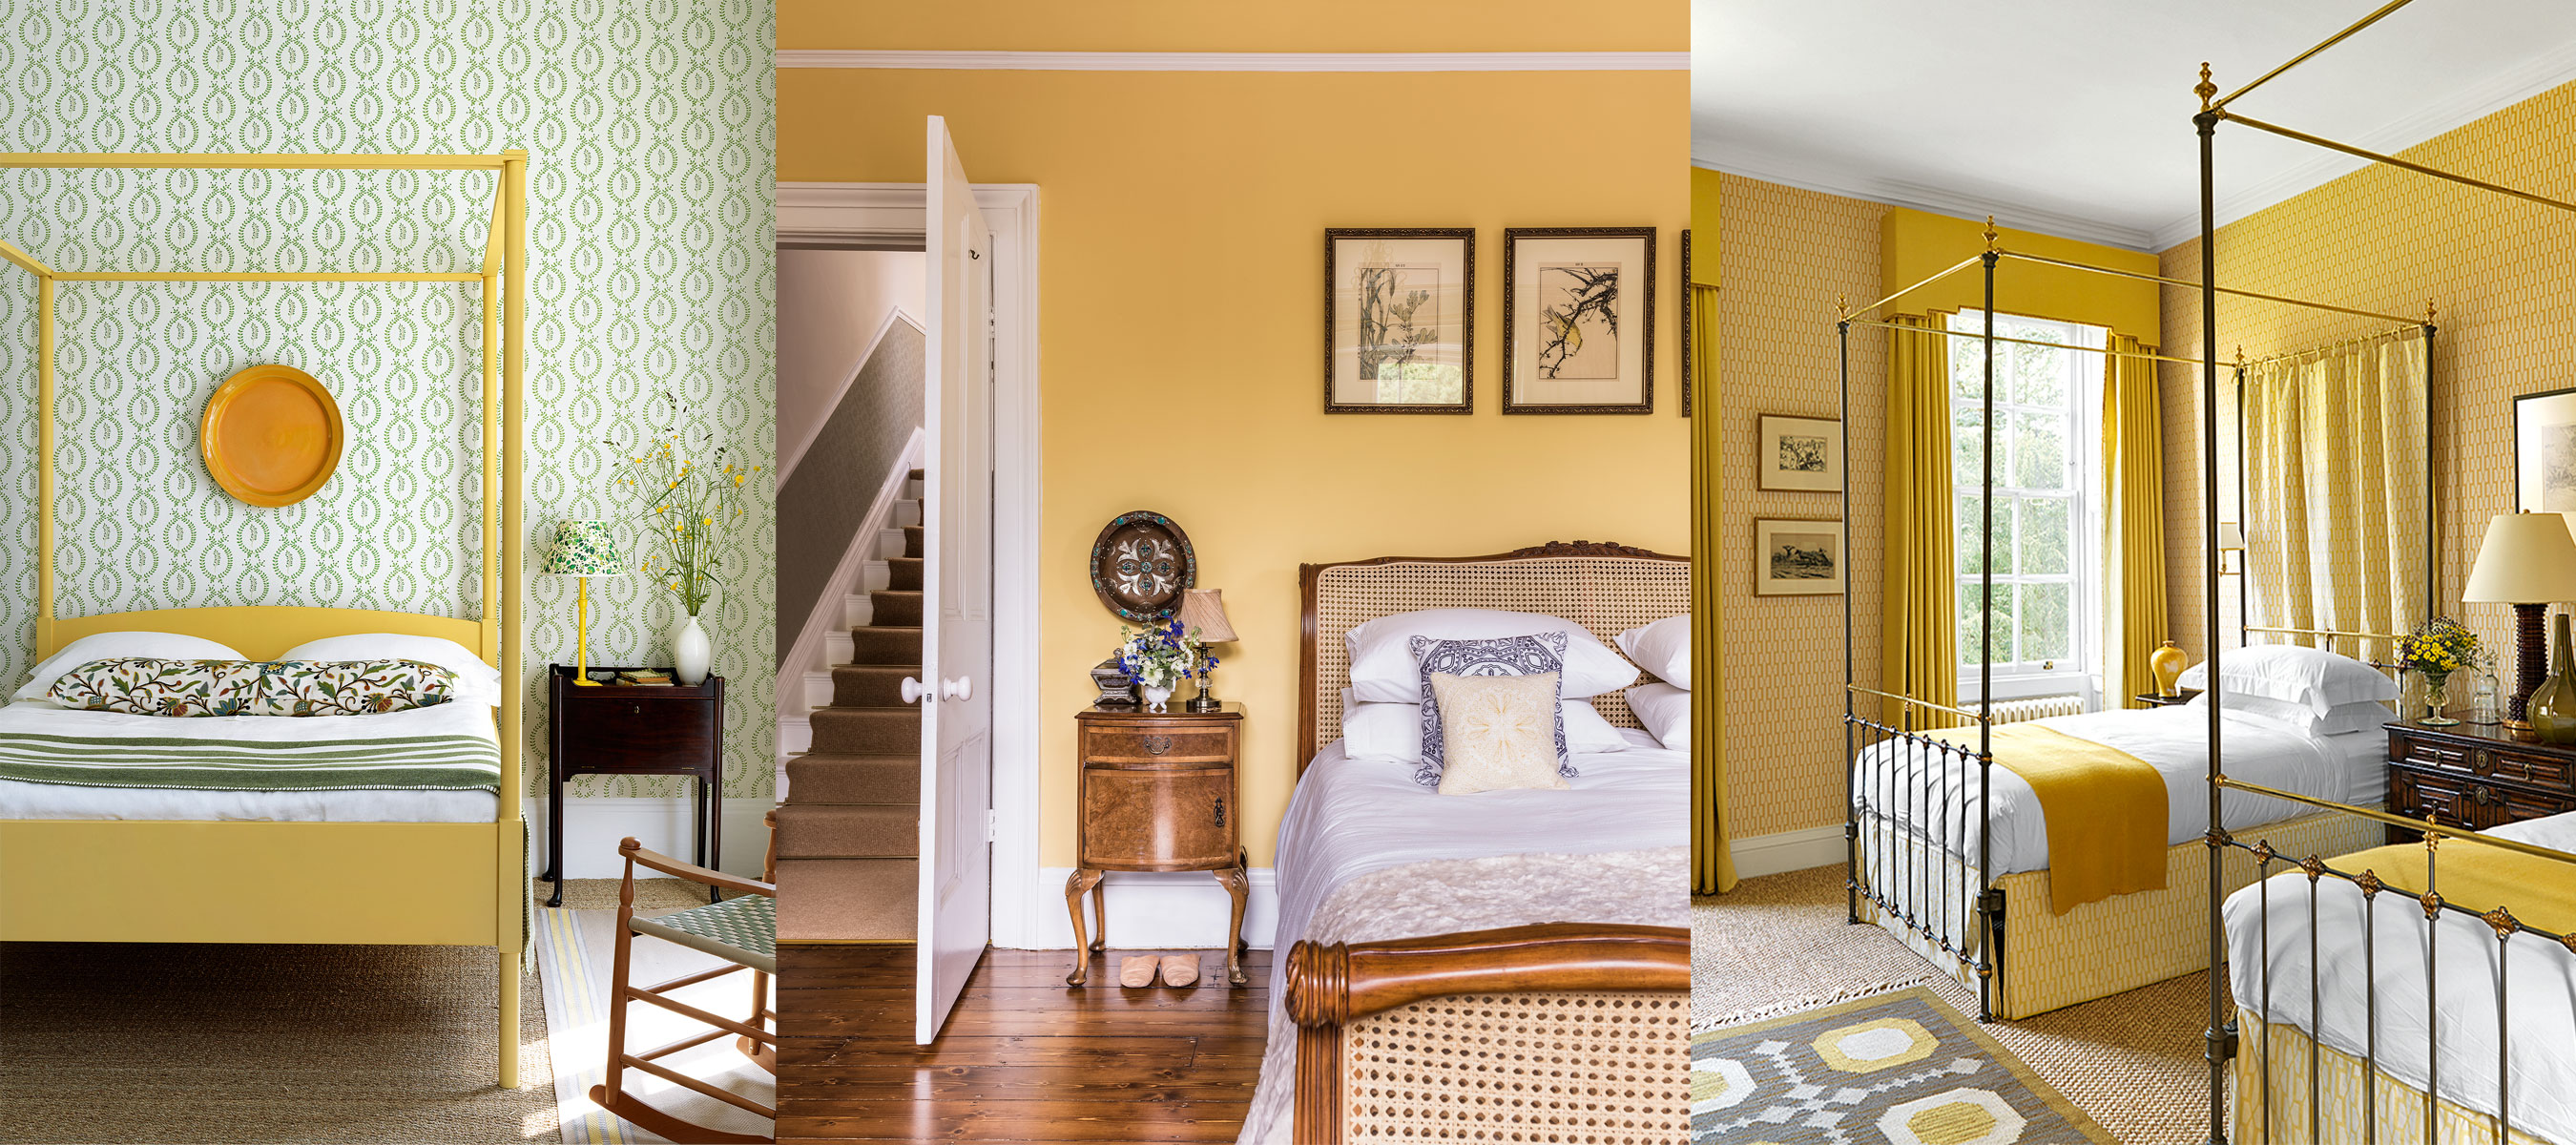 How to Prep a Room for Paint  Yellow living room colors, Yellow walls  living room, Living room color schemes